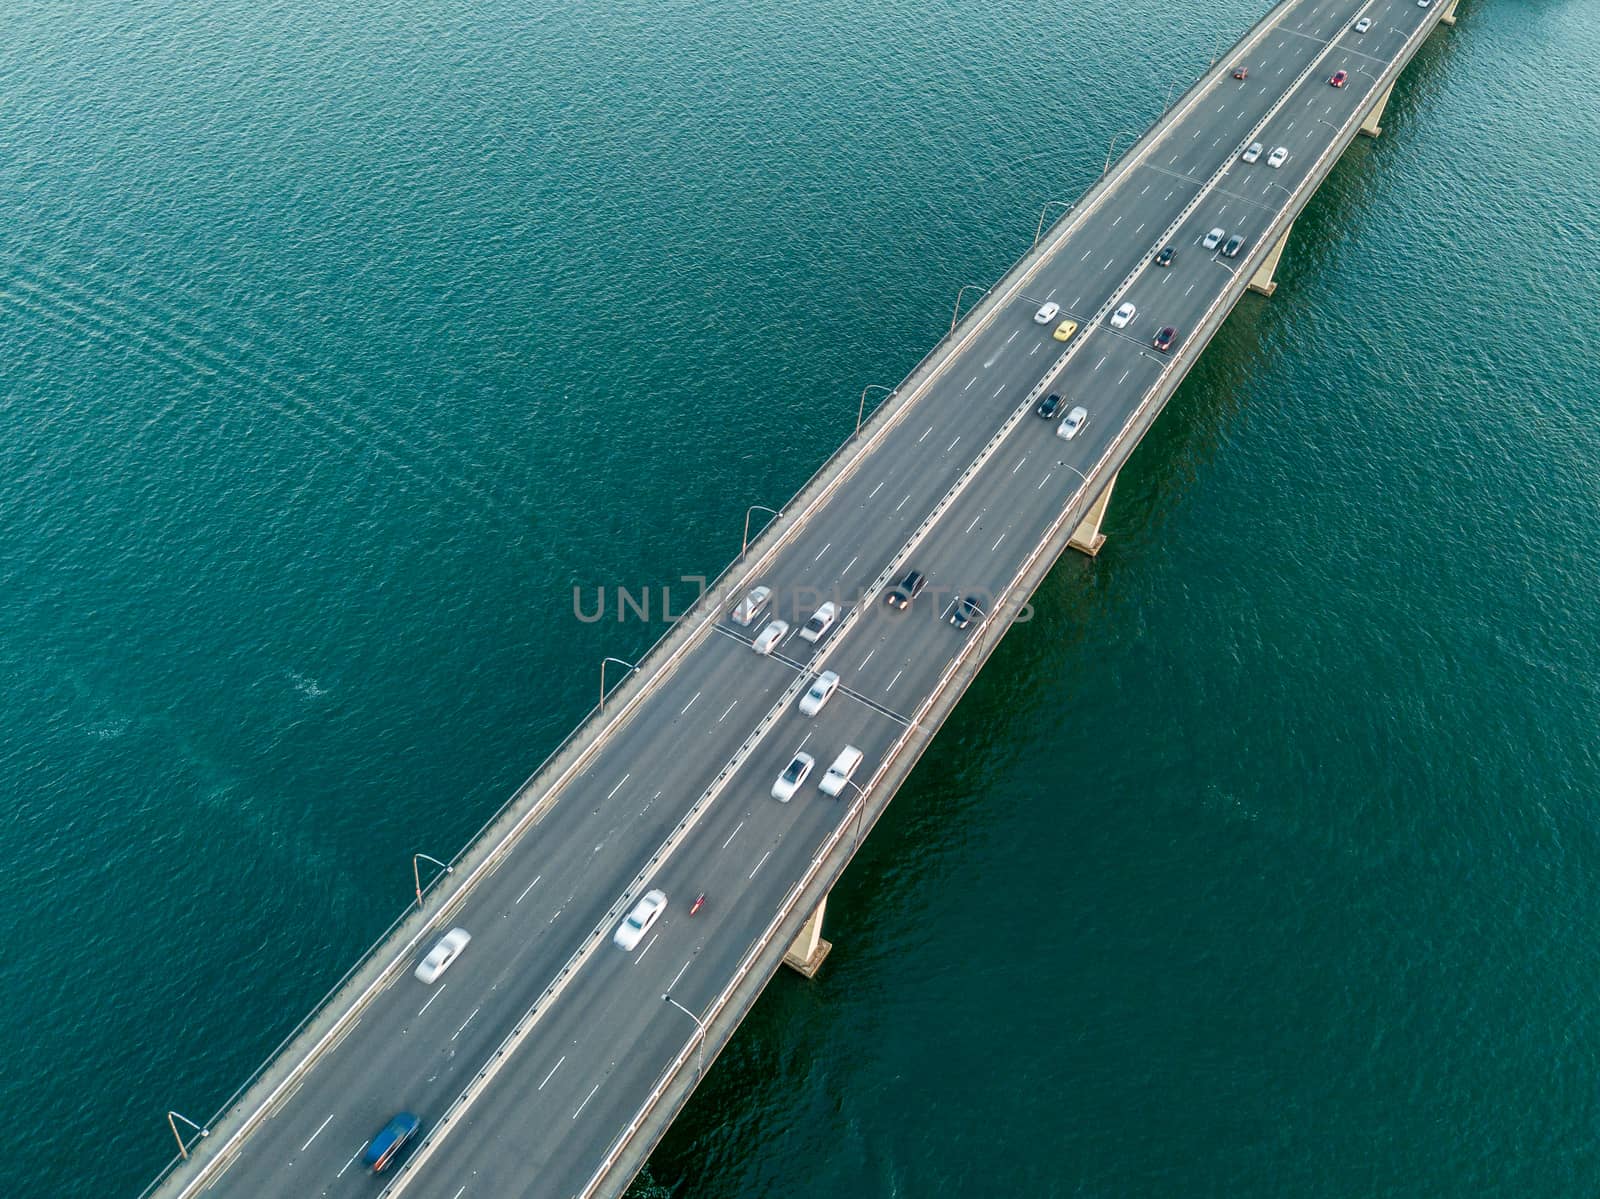 Vehicles on bridge over water by lovleah